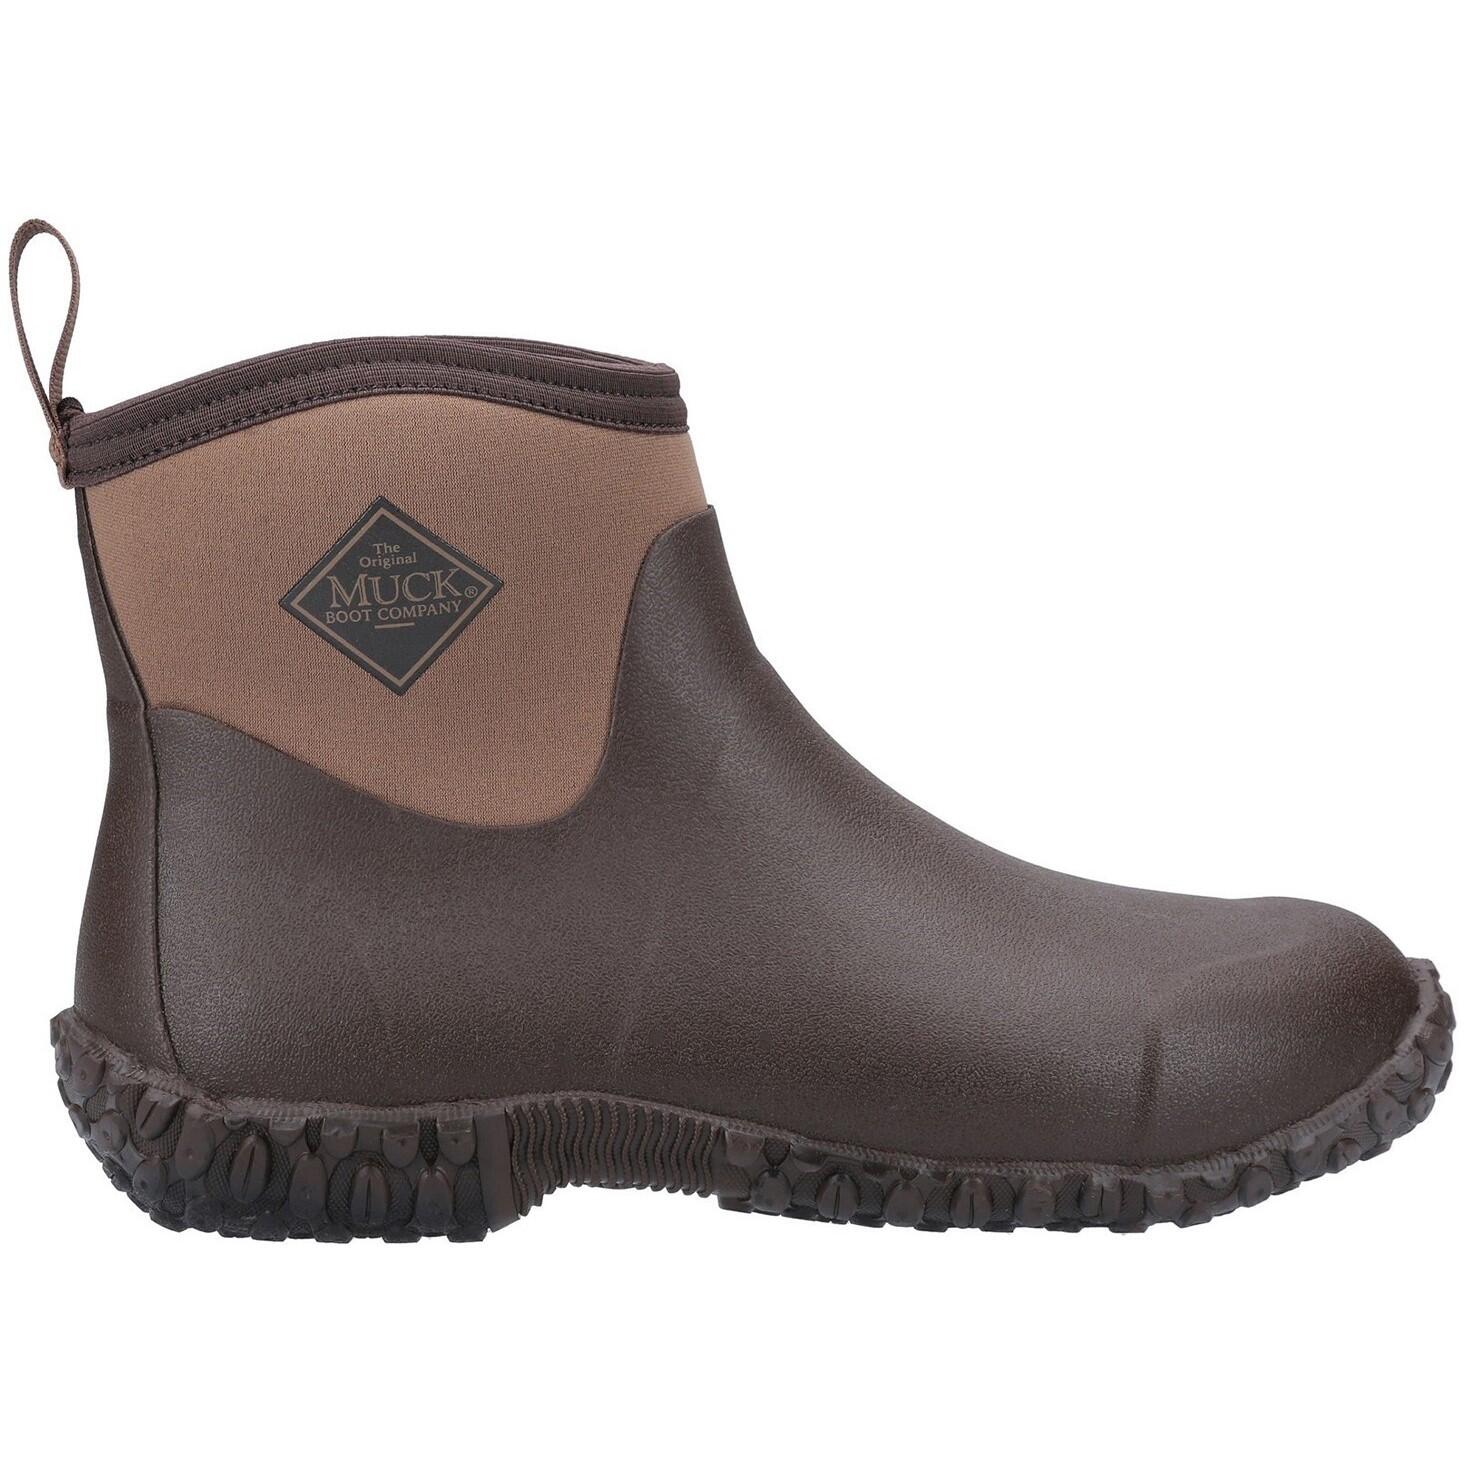 MUCK BOOTS Muckster II Ankle Textile/Weather Wellingtons BROWN